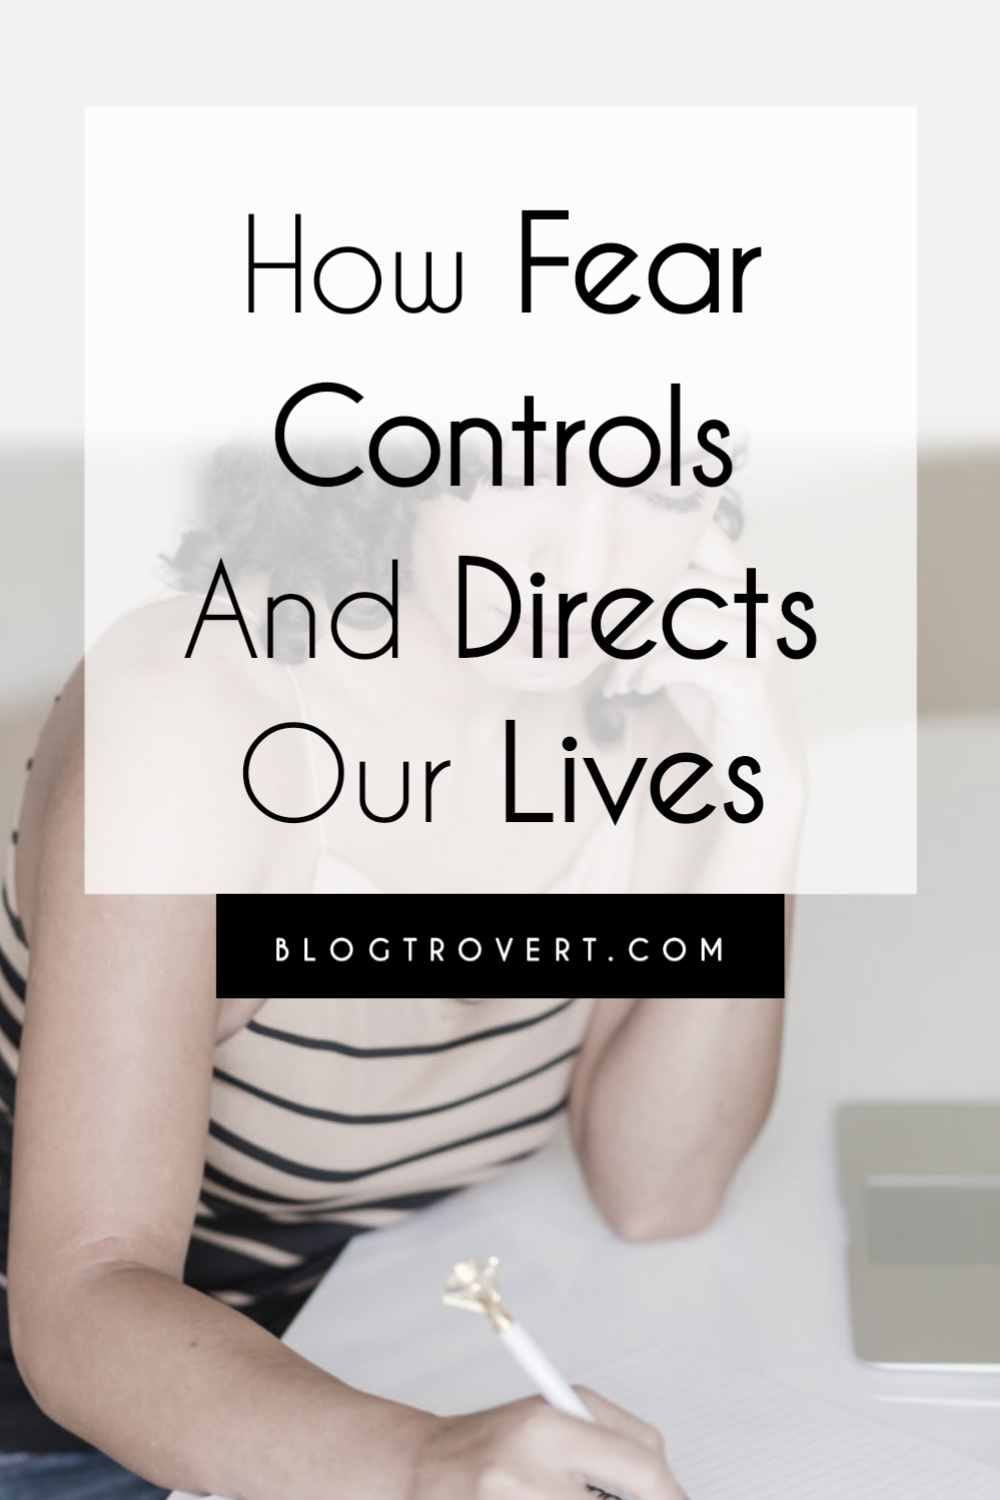 How fear controls us - Why we must take over 3